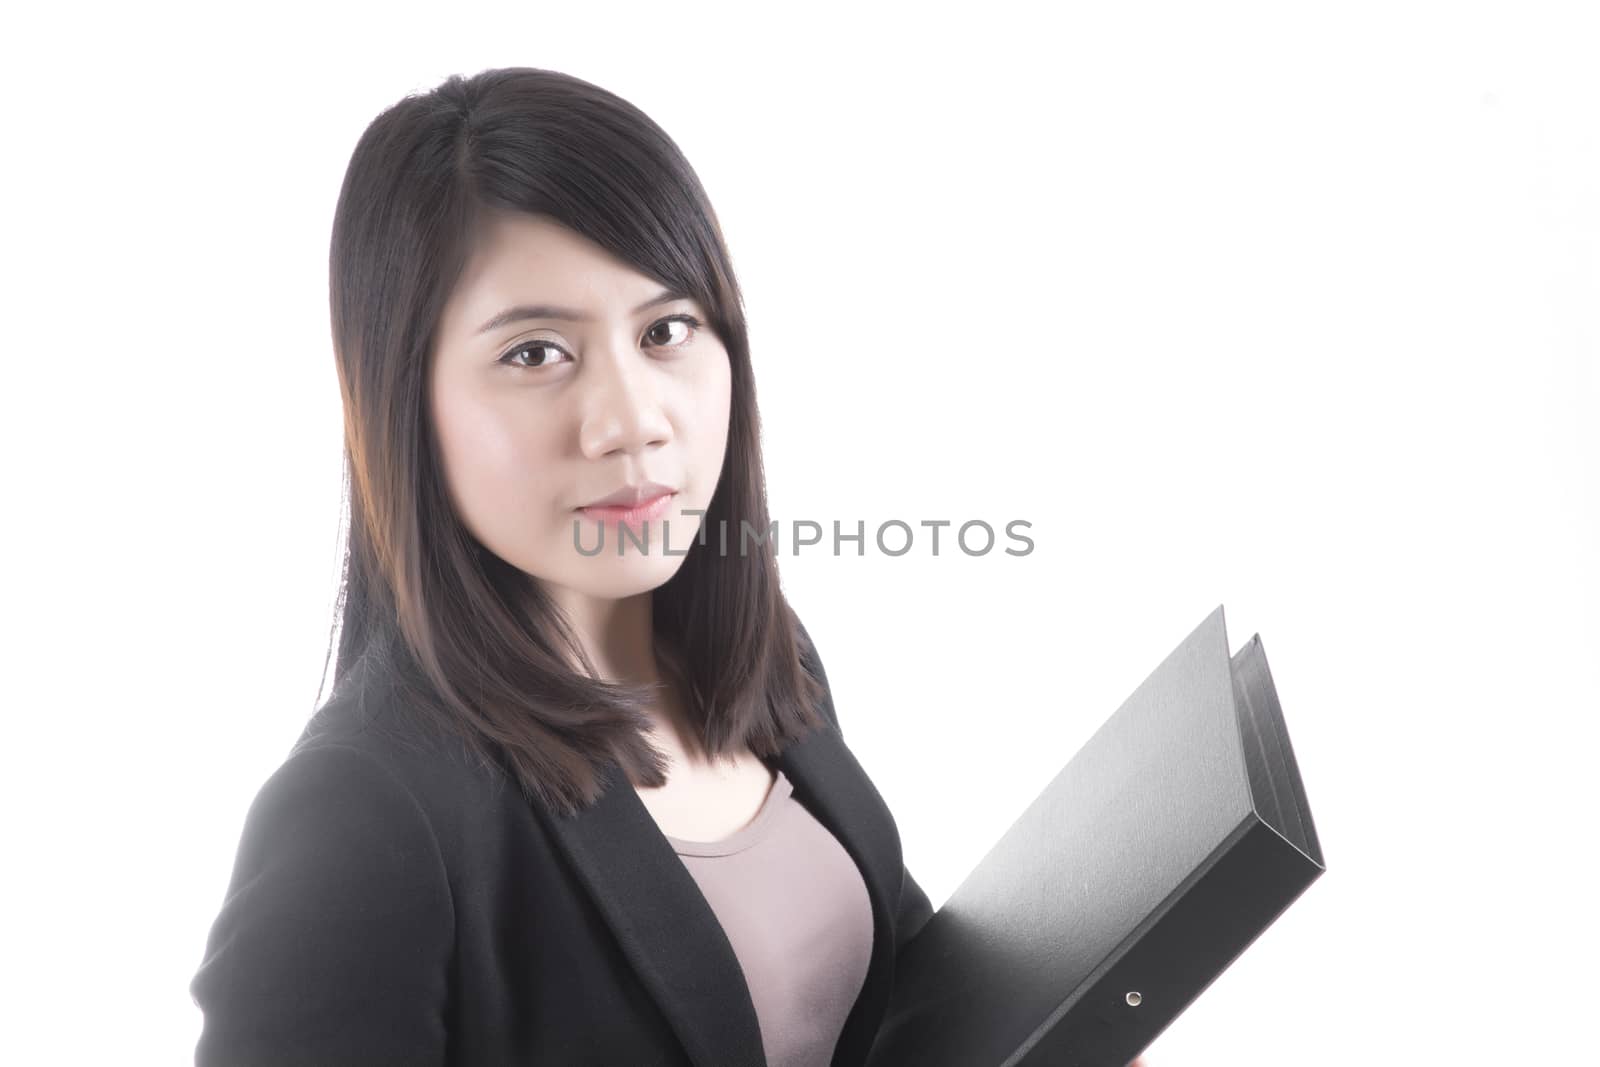 Asian woman in business office concept, isolated on white background